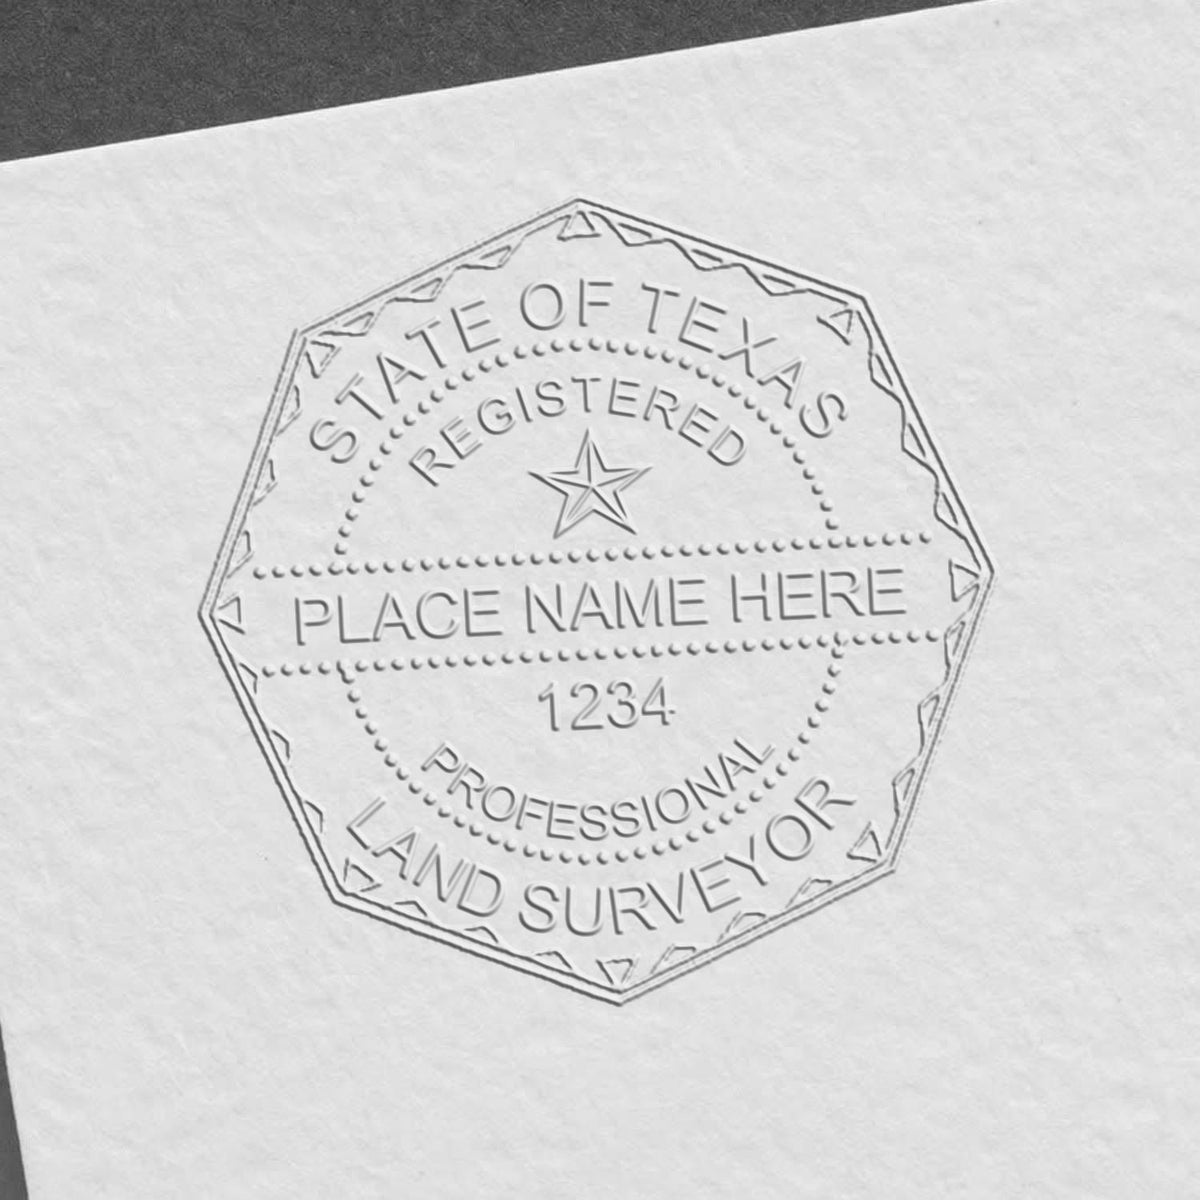 A photograph of the Hybrid Texas Land Surveyor Seal stamp impression reveals a vivid, professional image of the on paper.